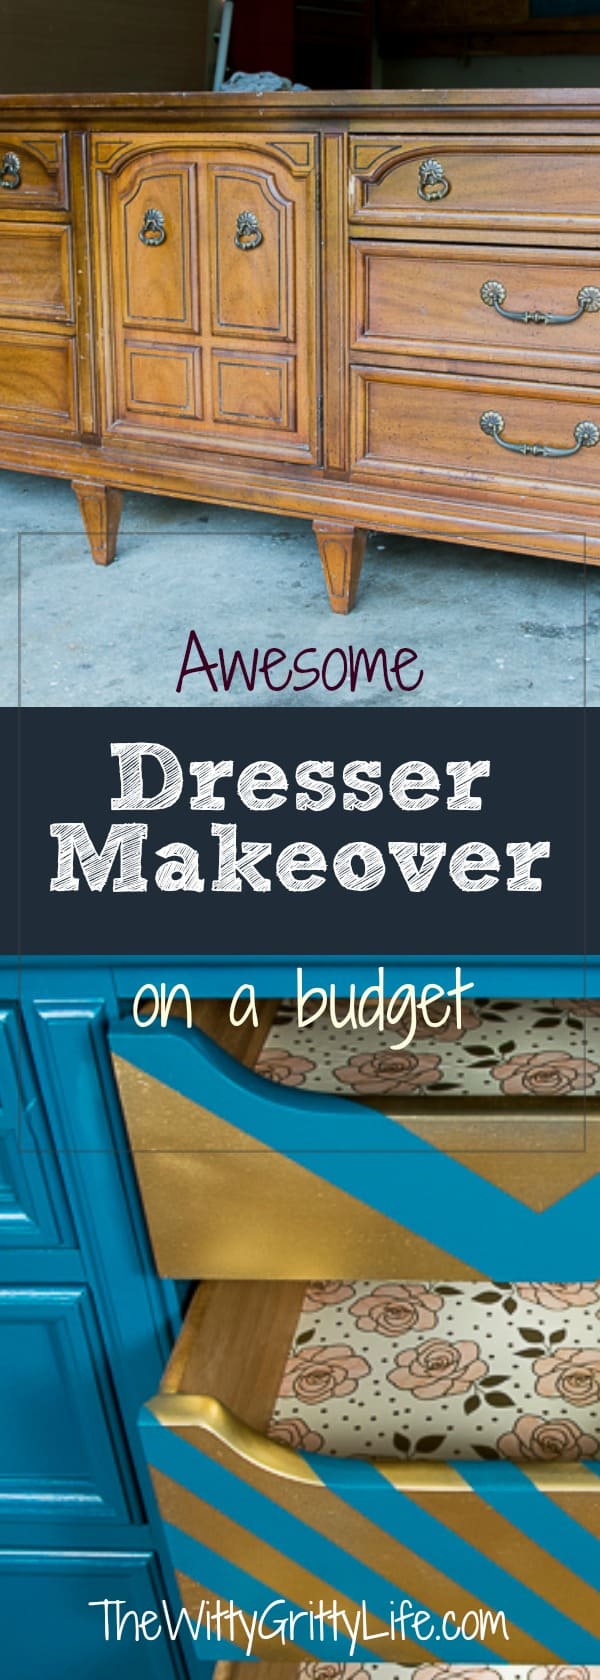 Nothing brings me more joy than bringing a sad old piece of furniture back to life. Transforming a dresser is not difficult to do. All it takes is a little know how and you can makeover a sad before into an amazing after. Let me show you how to create a piece of furniture you will be proud of!